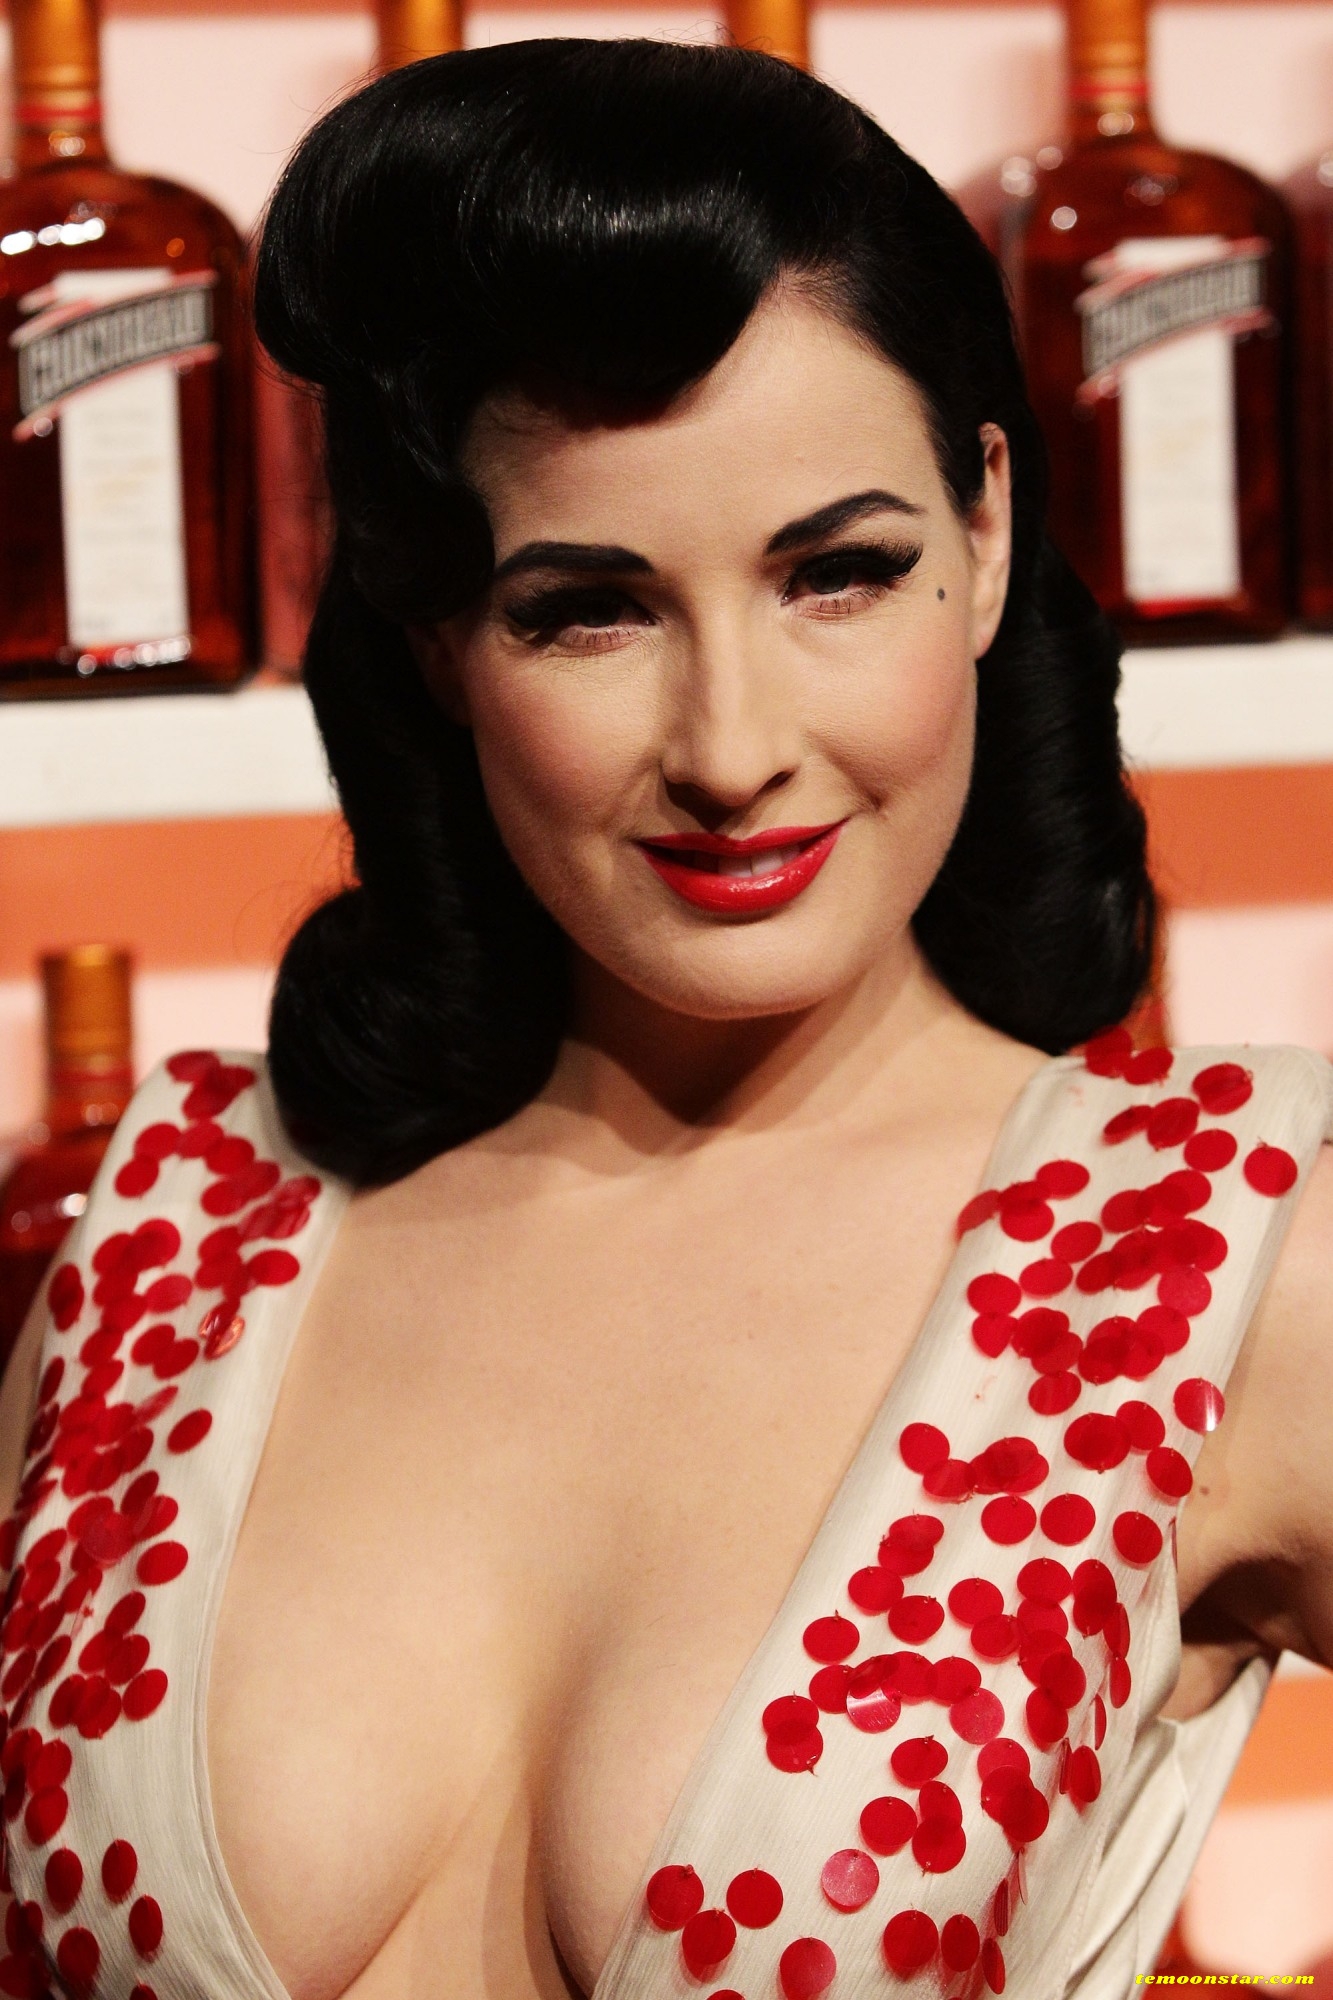 91594_Dita_Von_Teese__performance_of_her_Be_Cointreauversial_show_027_122_148lo.jpg